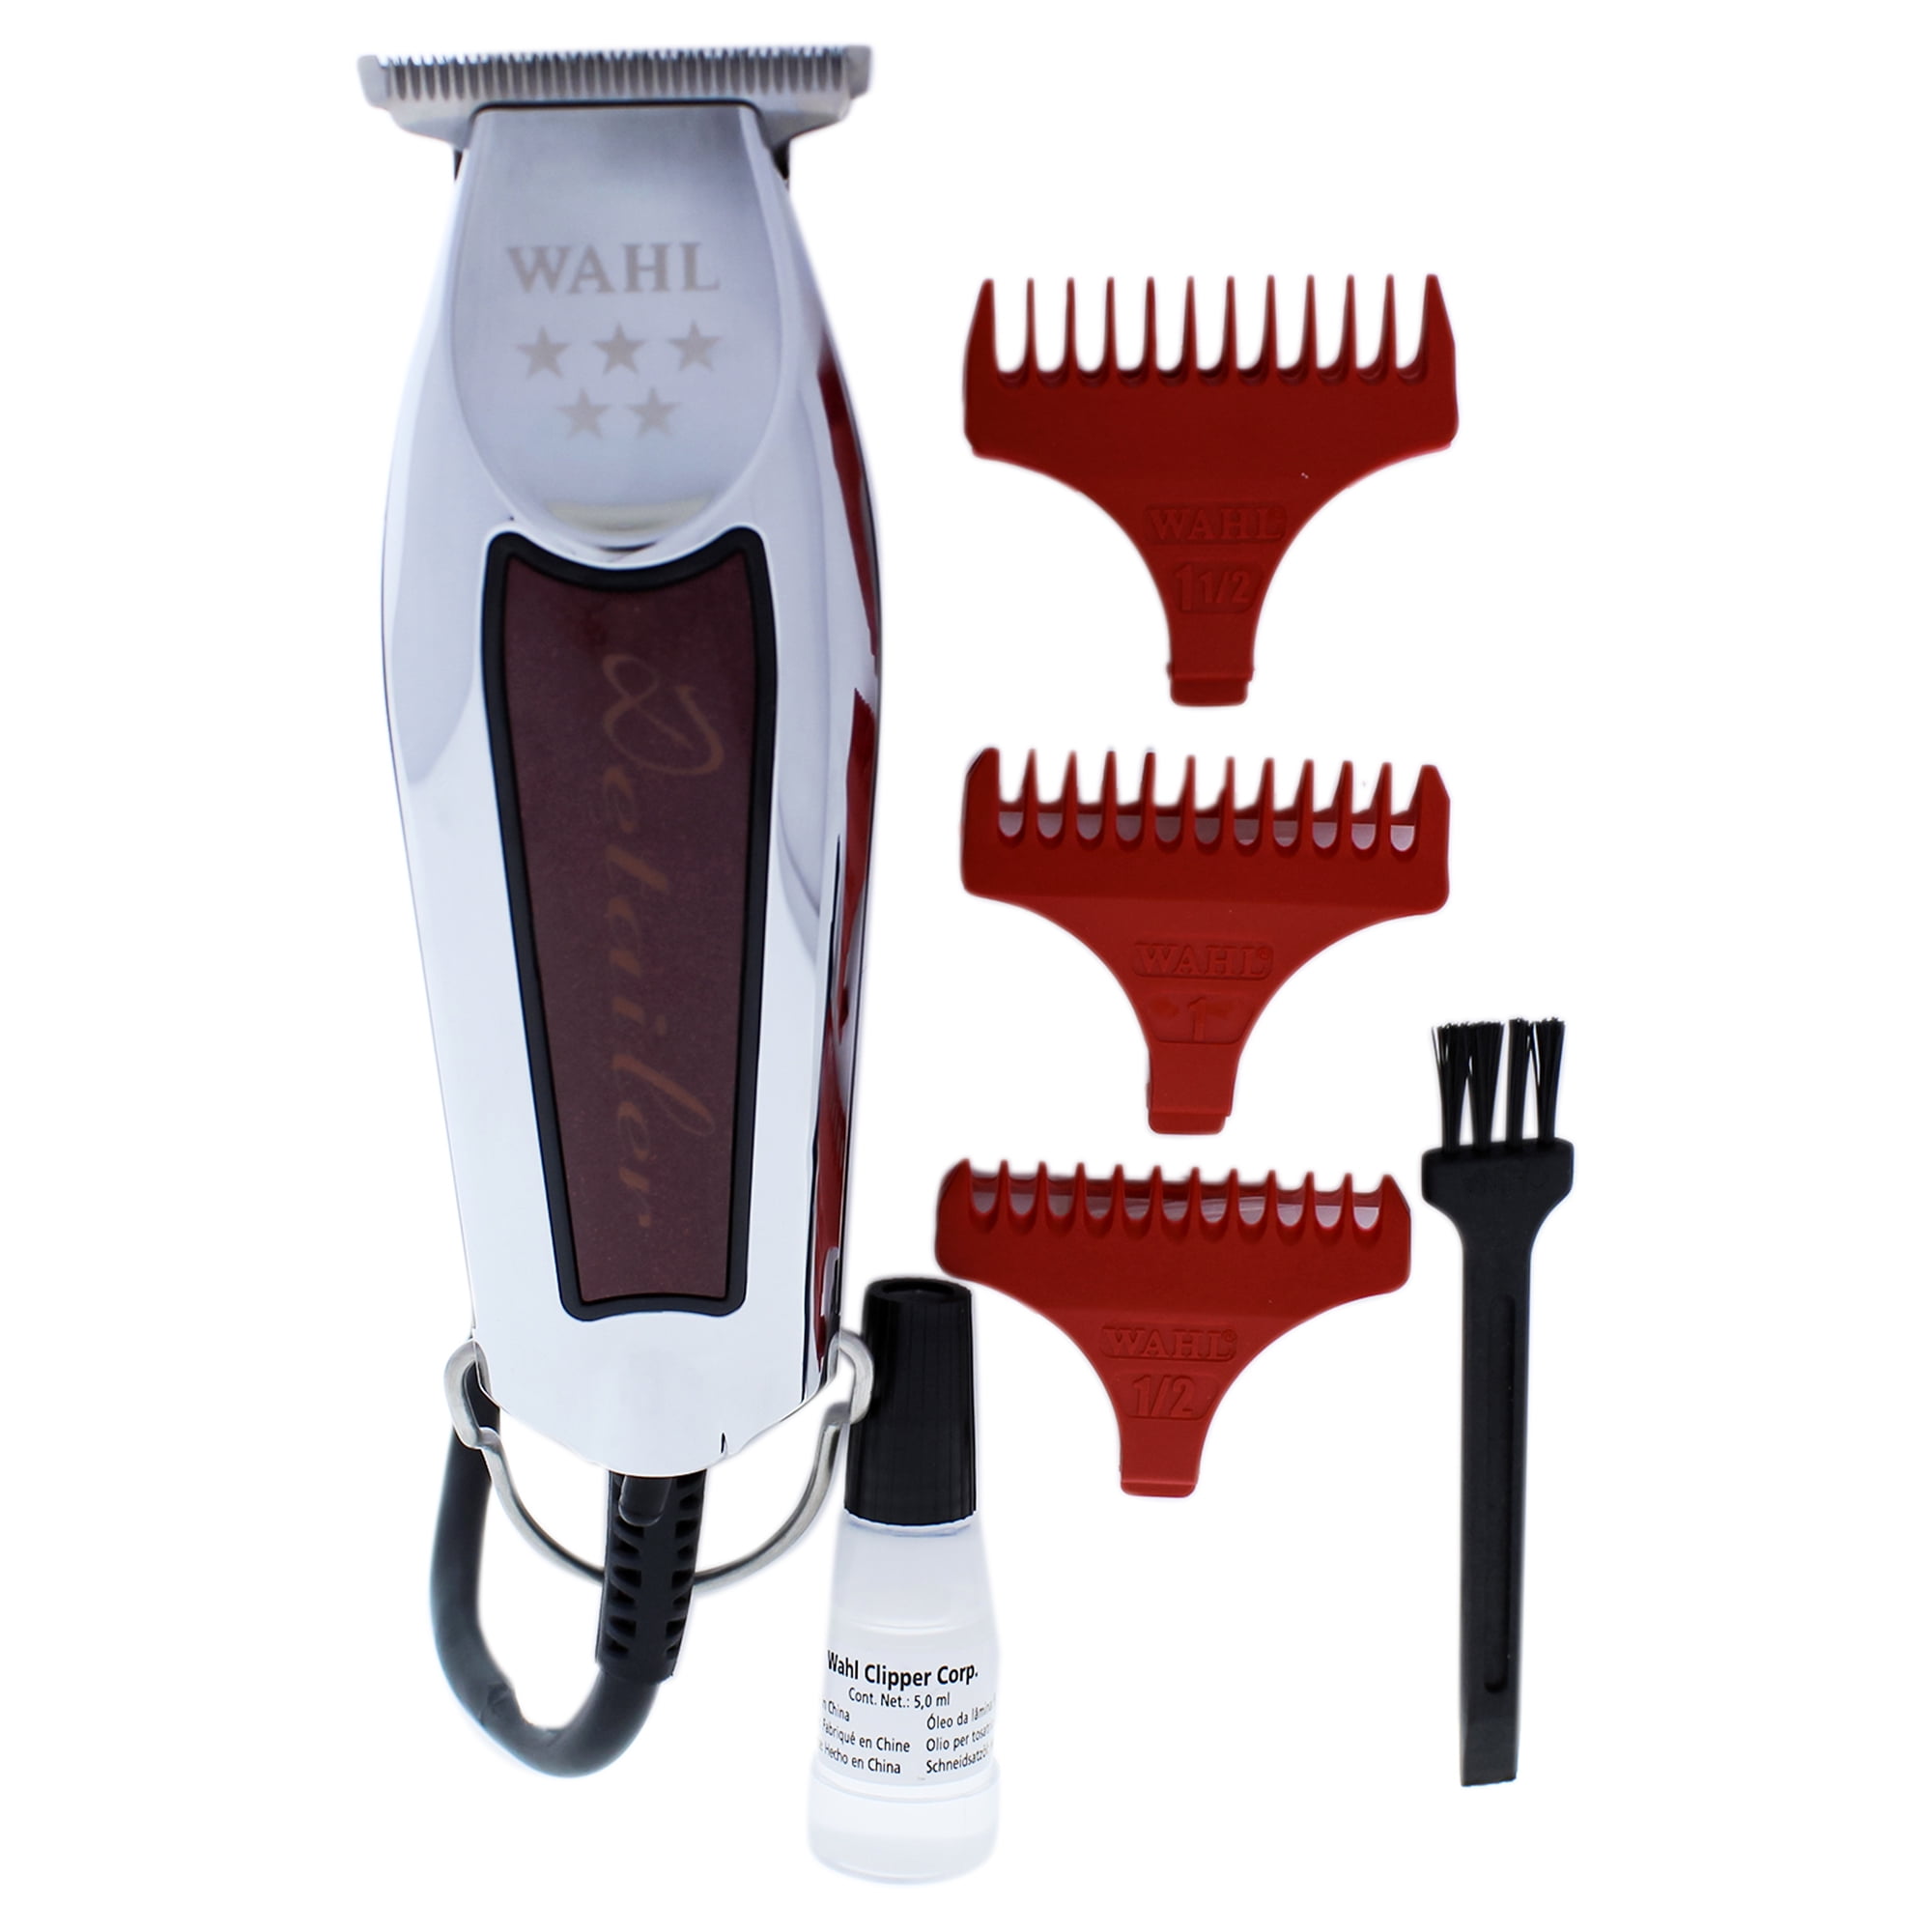 WAHL PROFESSIONAL 5 Star Detailer - Model # 8081 - Silver/Red for Unisex -  1 Piece Kit Trimmer